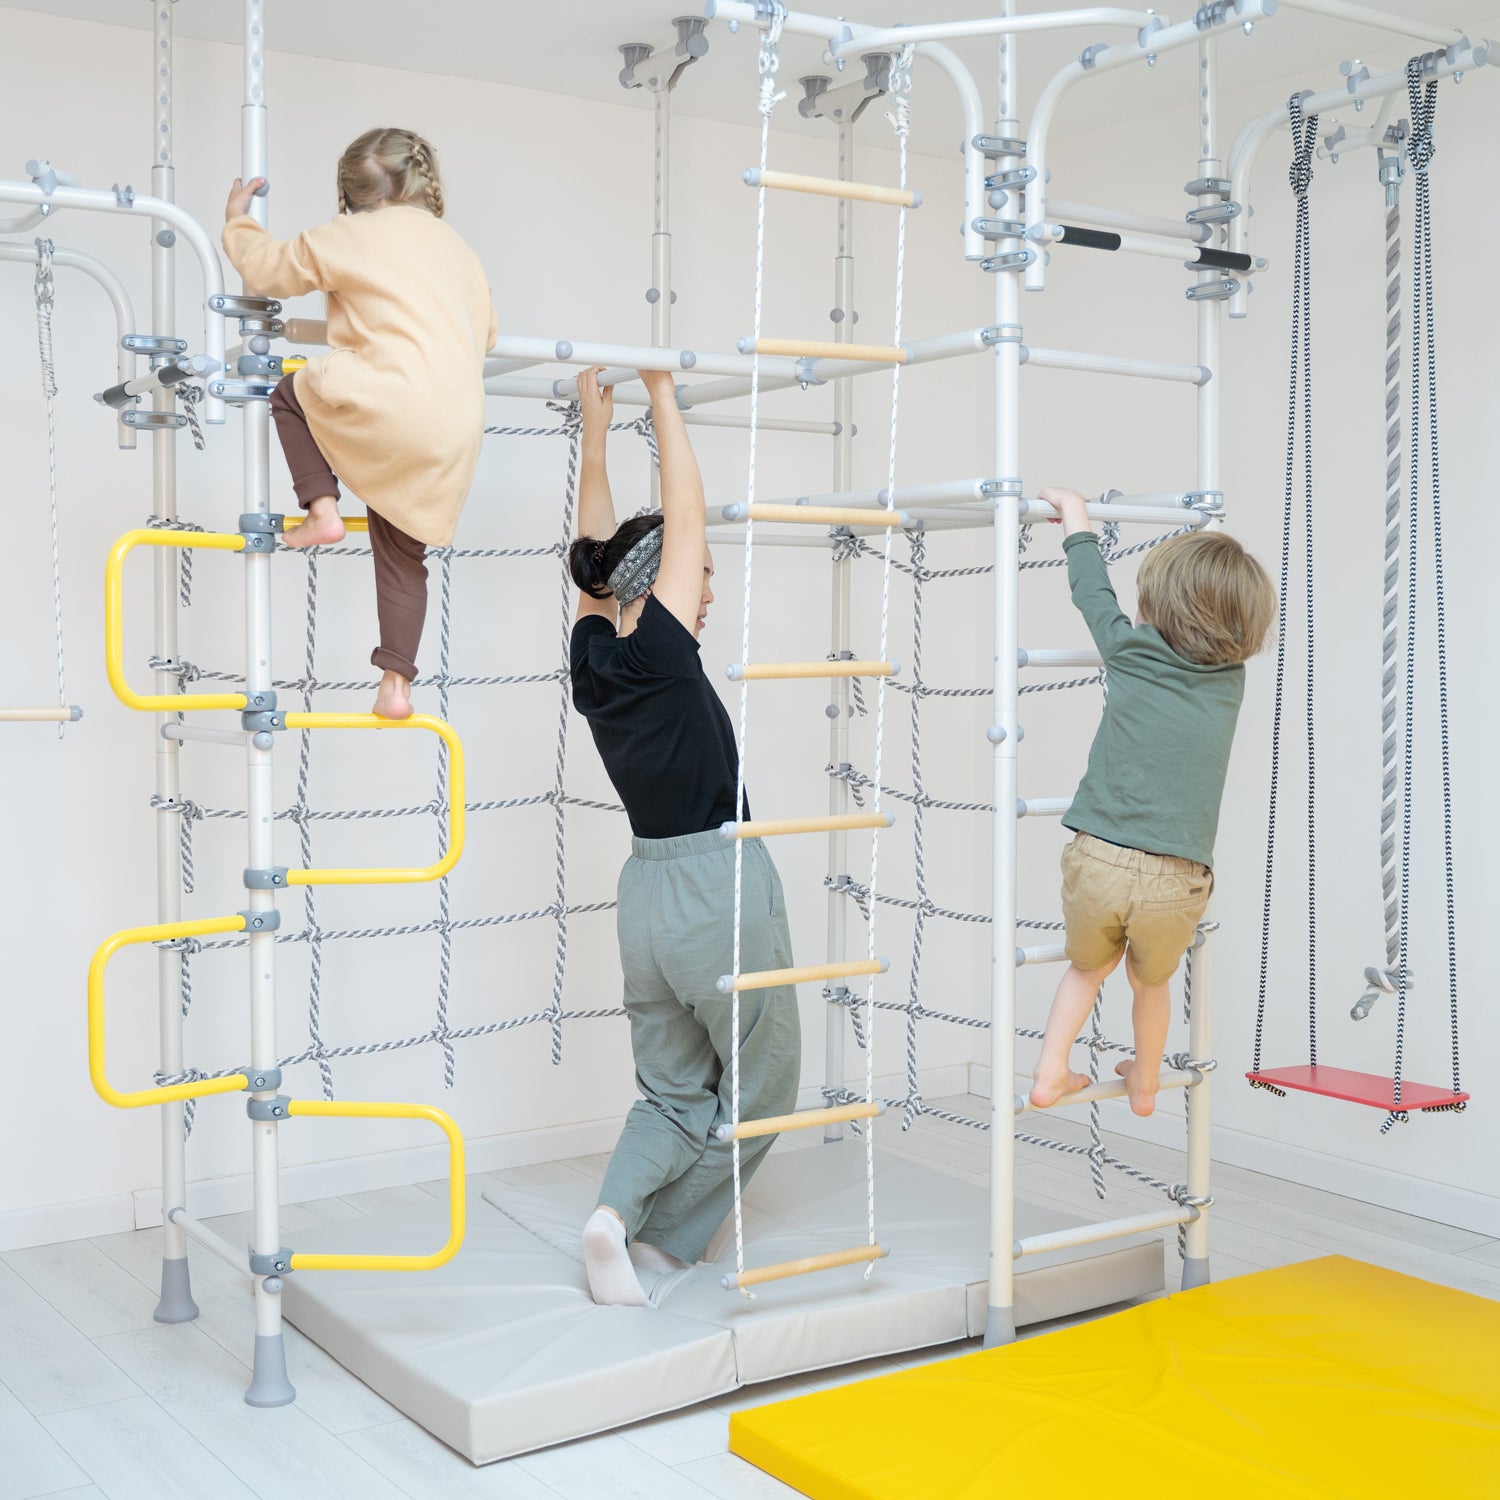 Kids playing in jungle gym